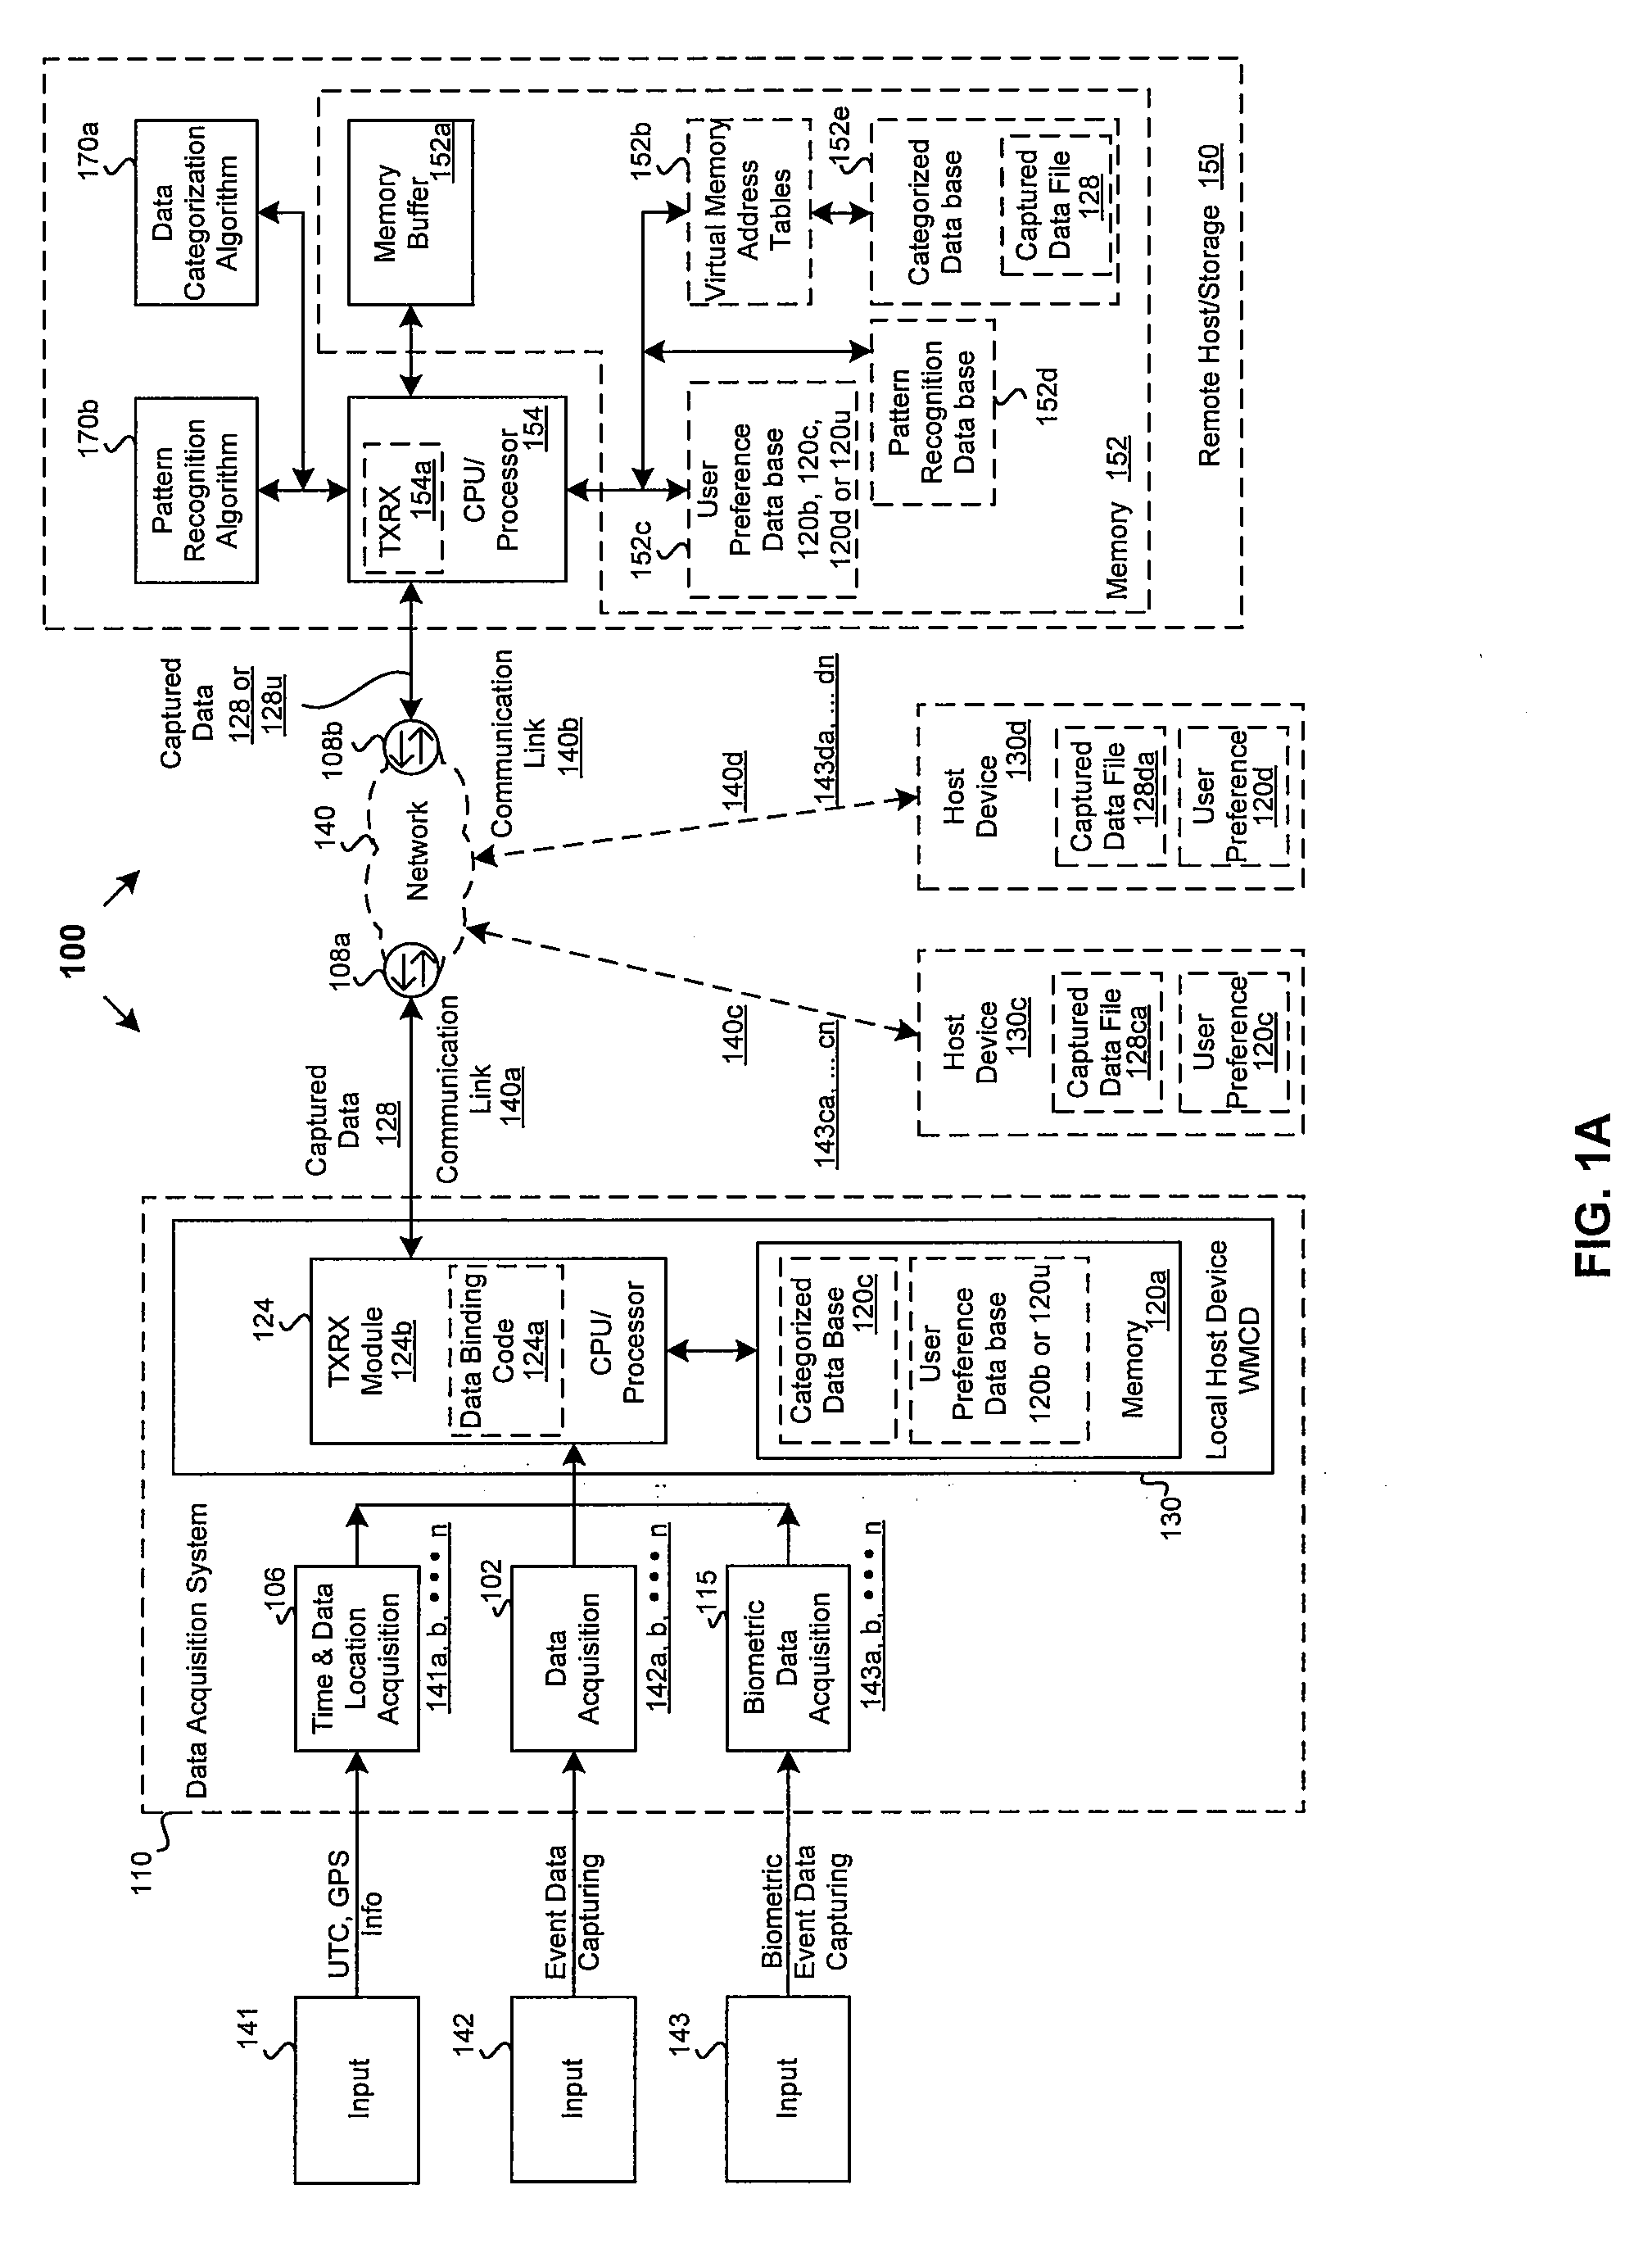 Method and system for processing information based on detected biometric event data